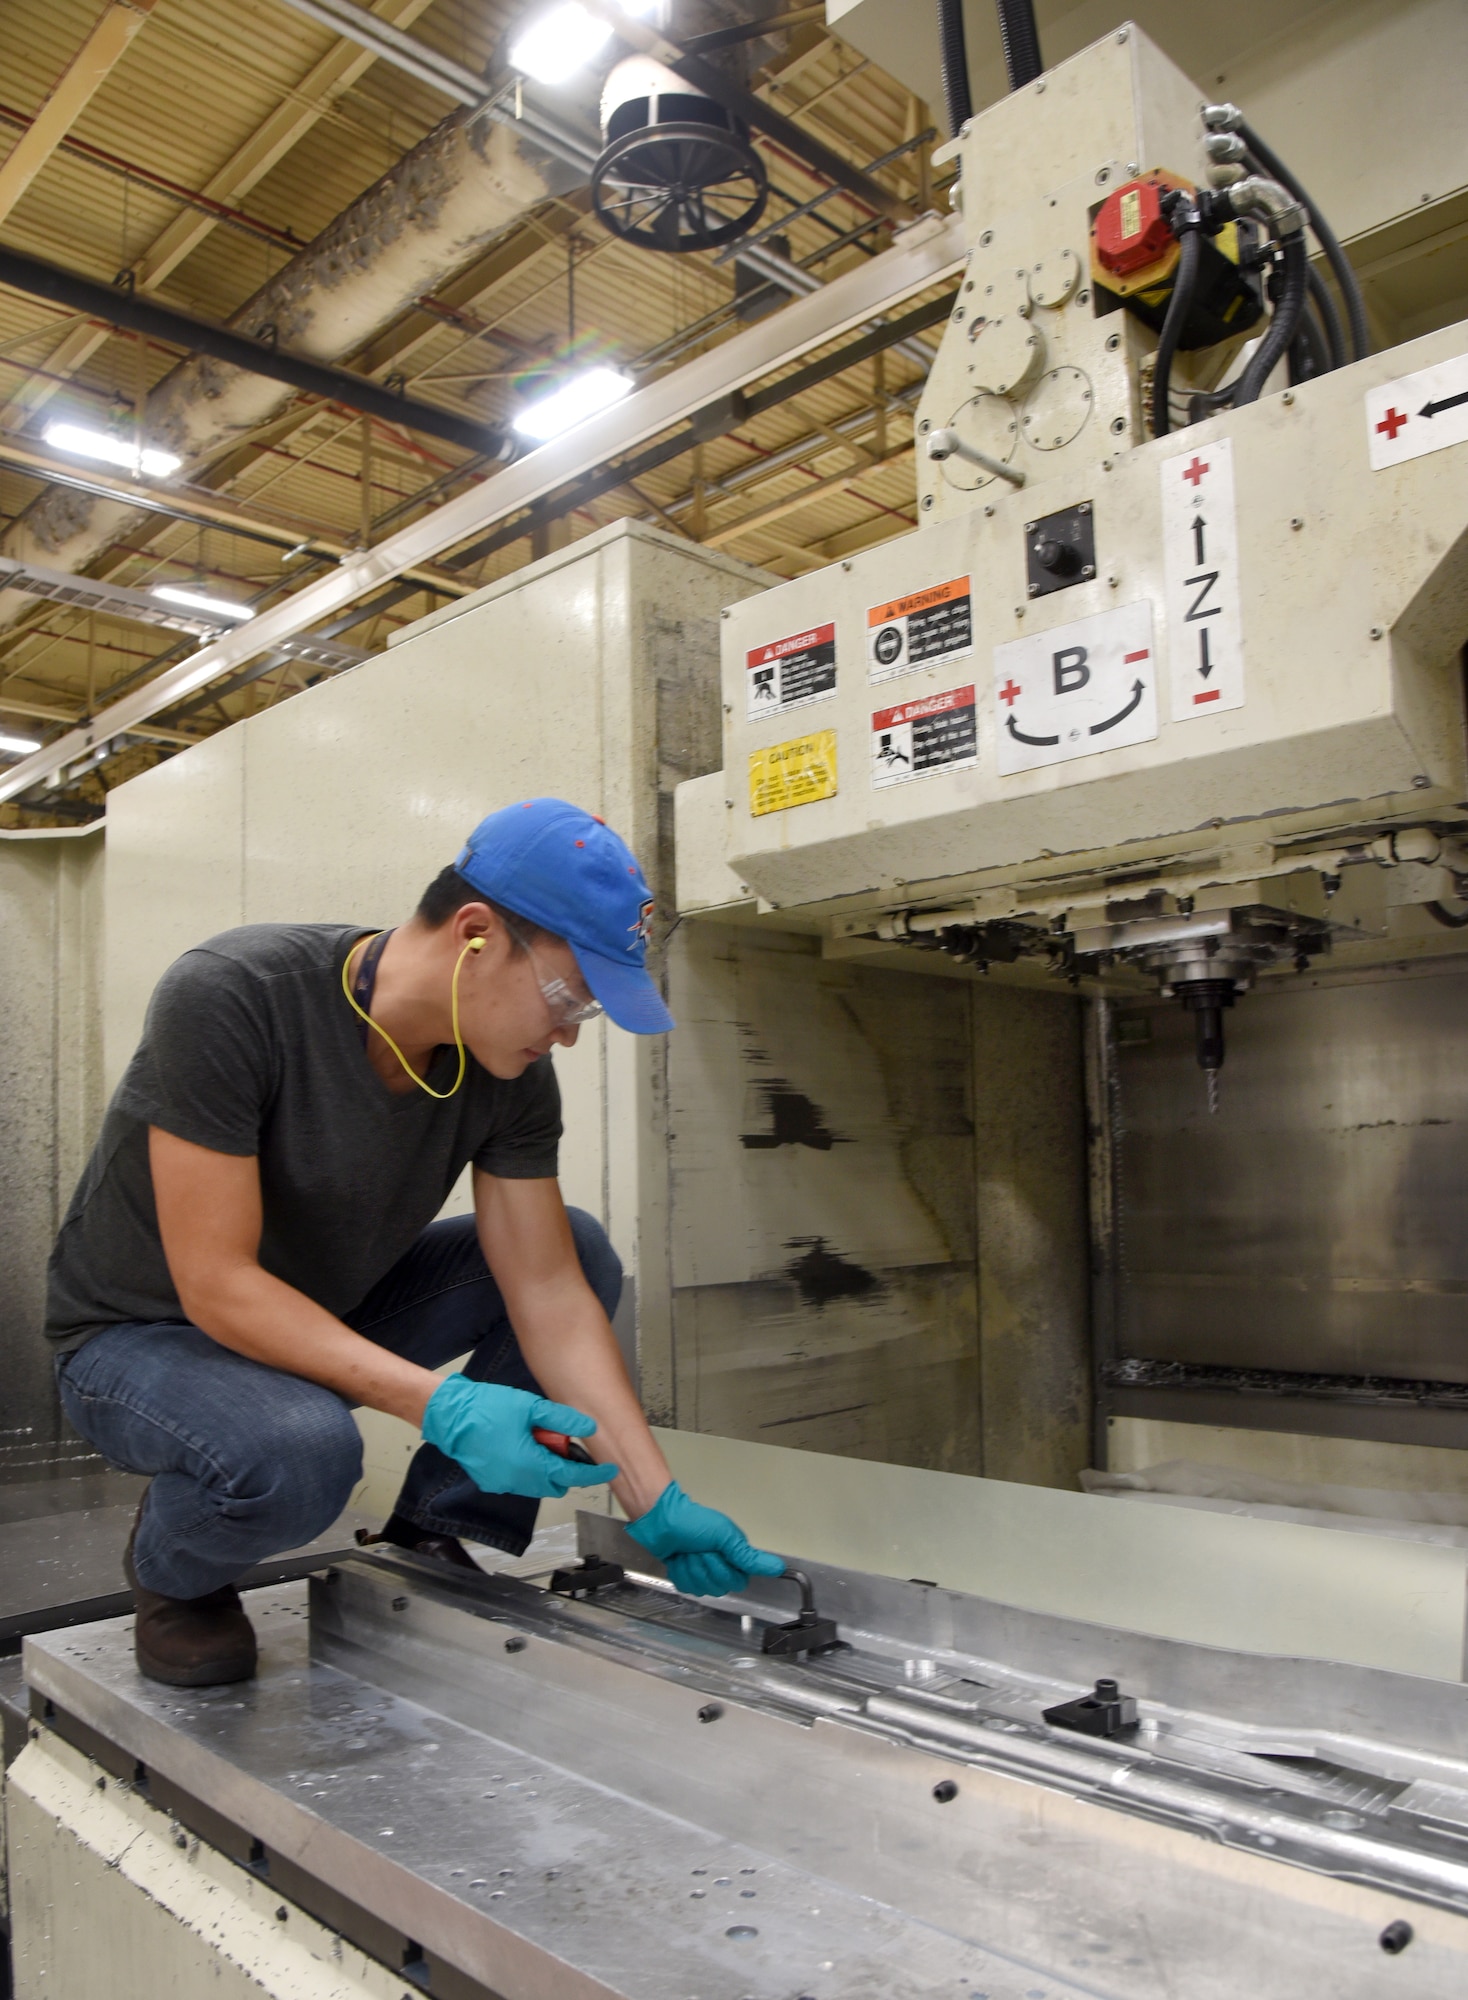 Truyen Ngo, with the 76th Commodities Maintenance Group’s Numerical Control Machine Shop, fastens a keel beam into the SNK-80V CNC Milling Machine, to have specific joggles cut into it so the part will fit perfectly into its designated place on the KC-135 aircraft. (U.S. Air Force photo/Kelly White)